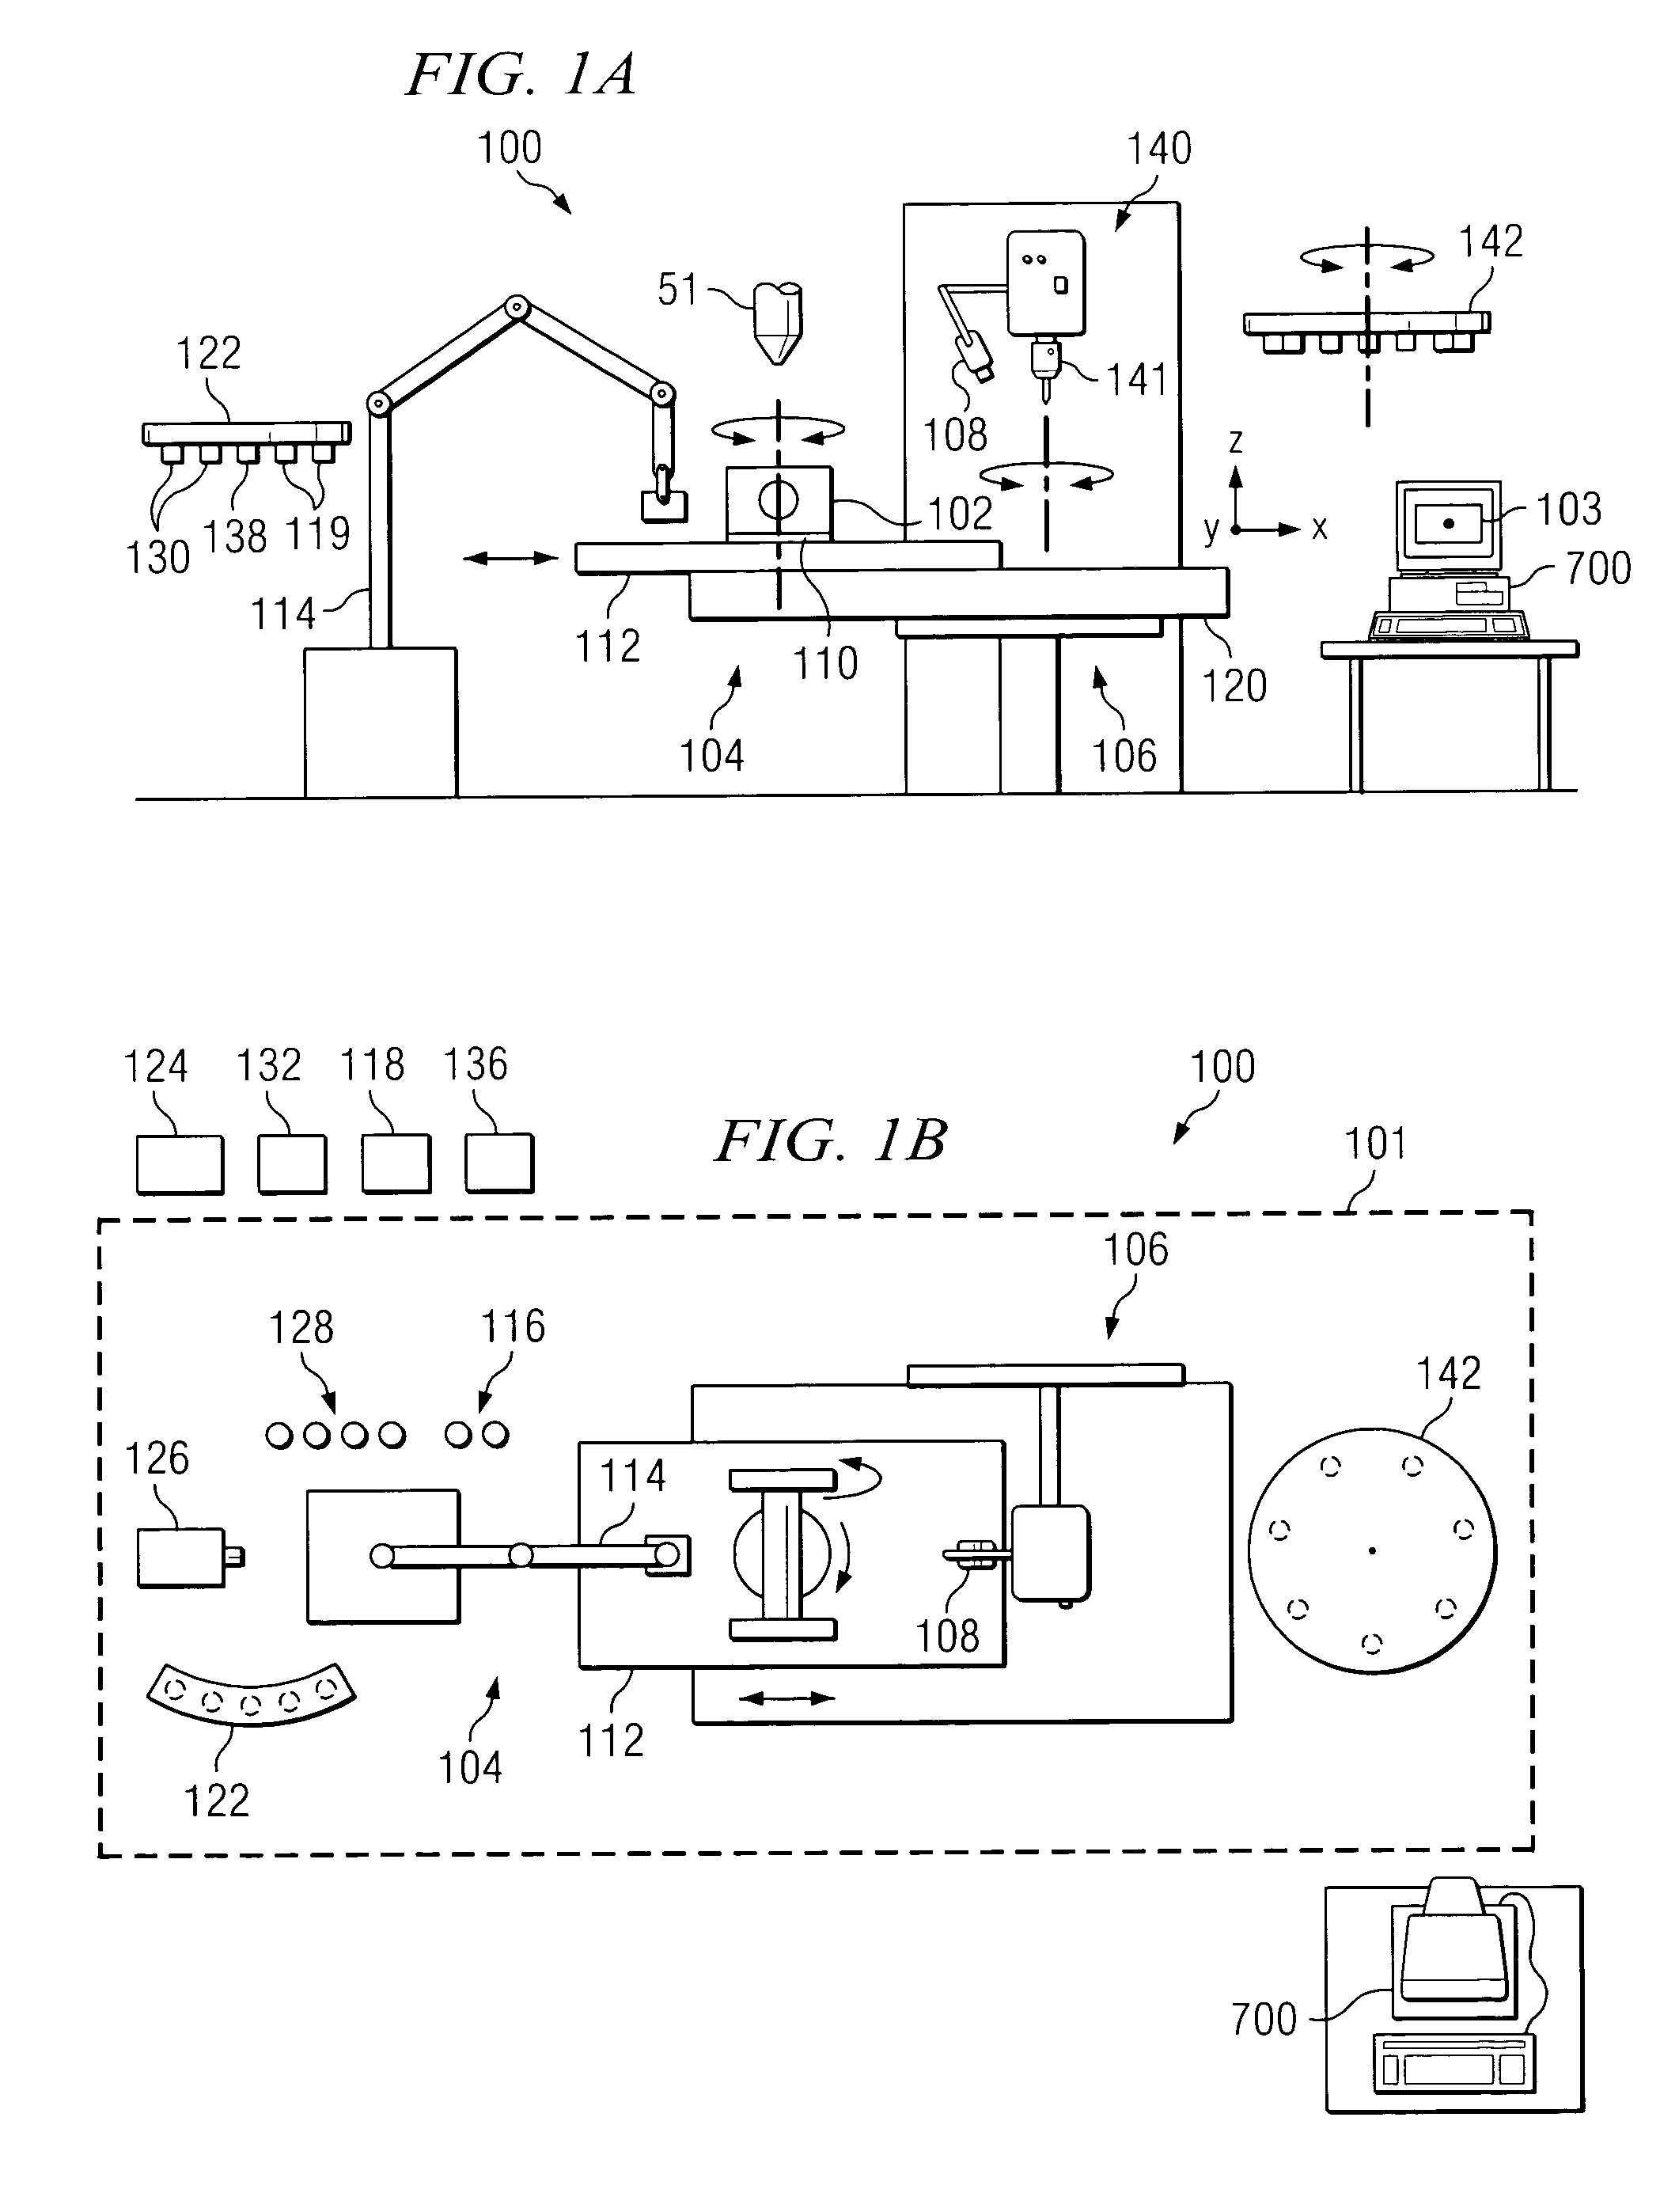 Powder delivery system and method